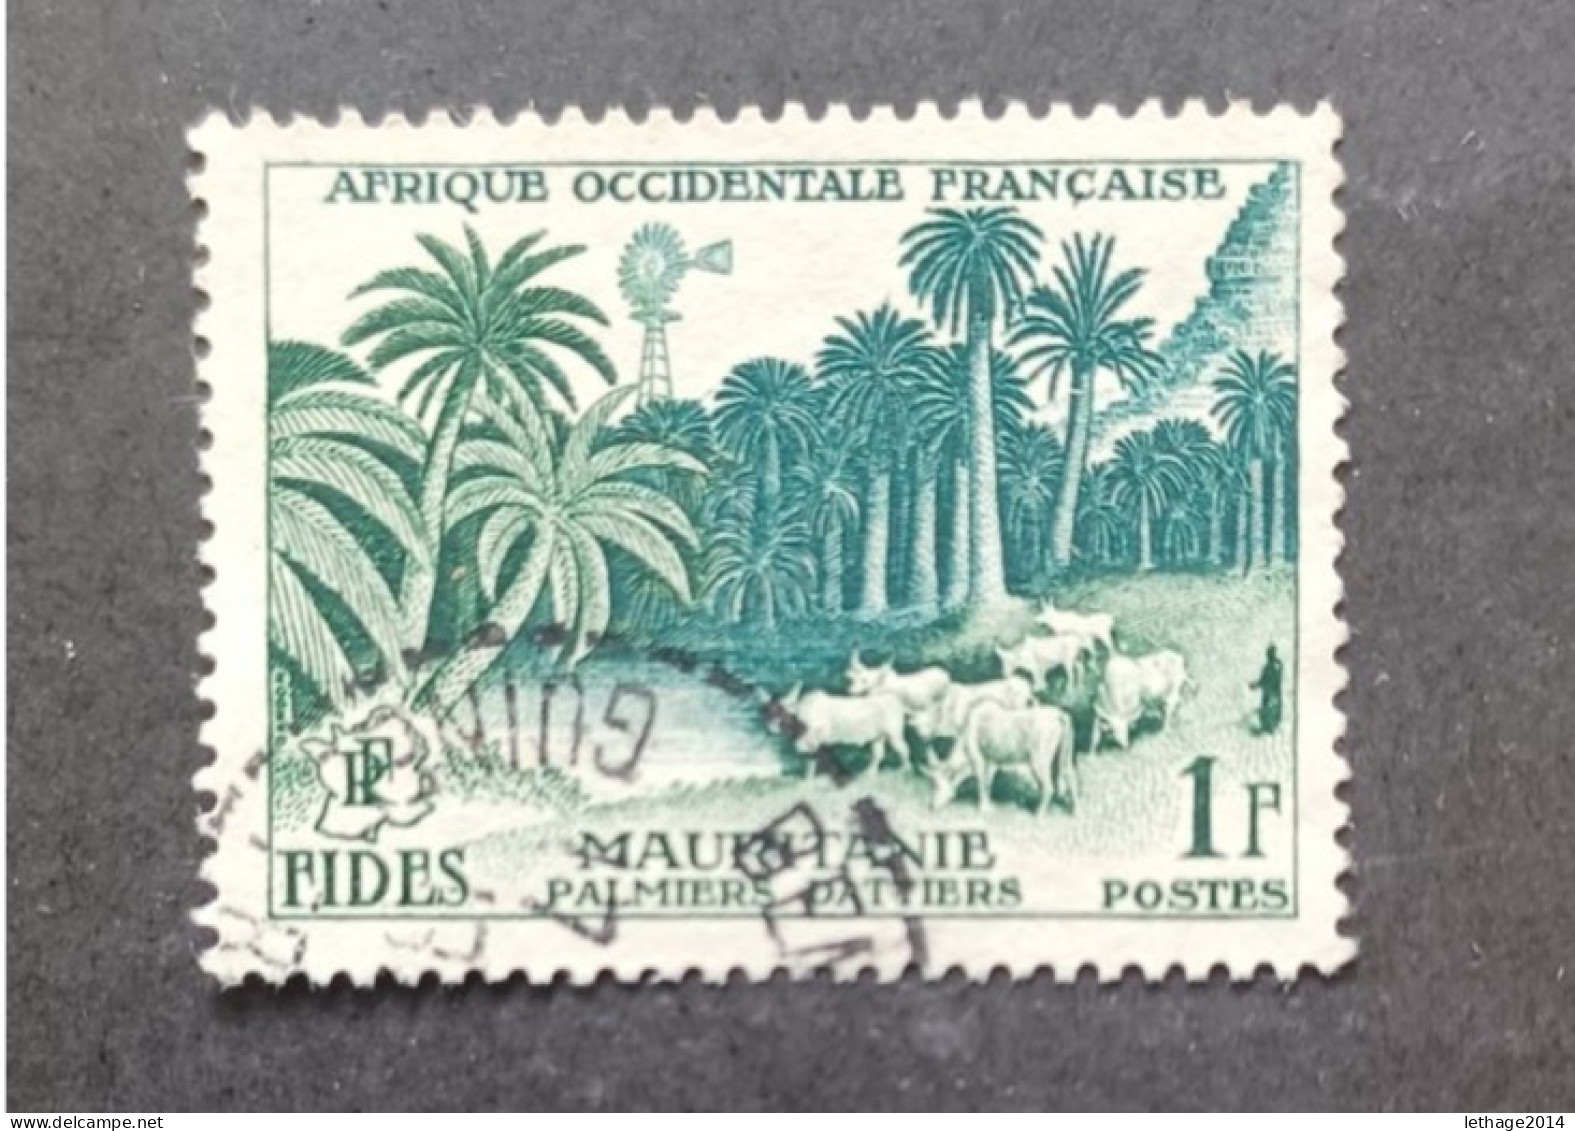 COLONIE FRANCE MAURITANIE 1958 PALMIERS DATTERIES - Usados